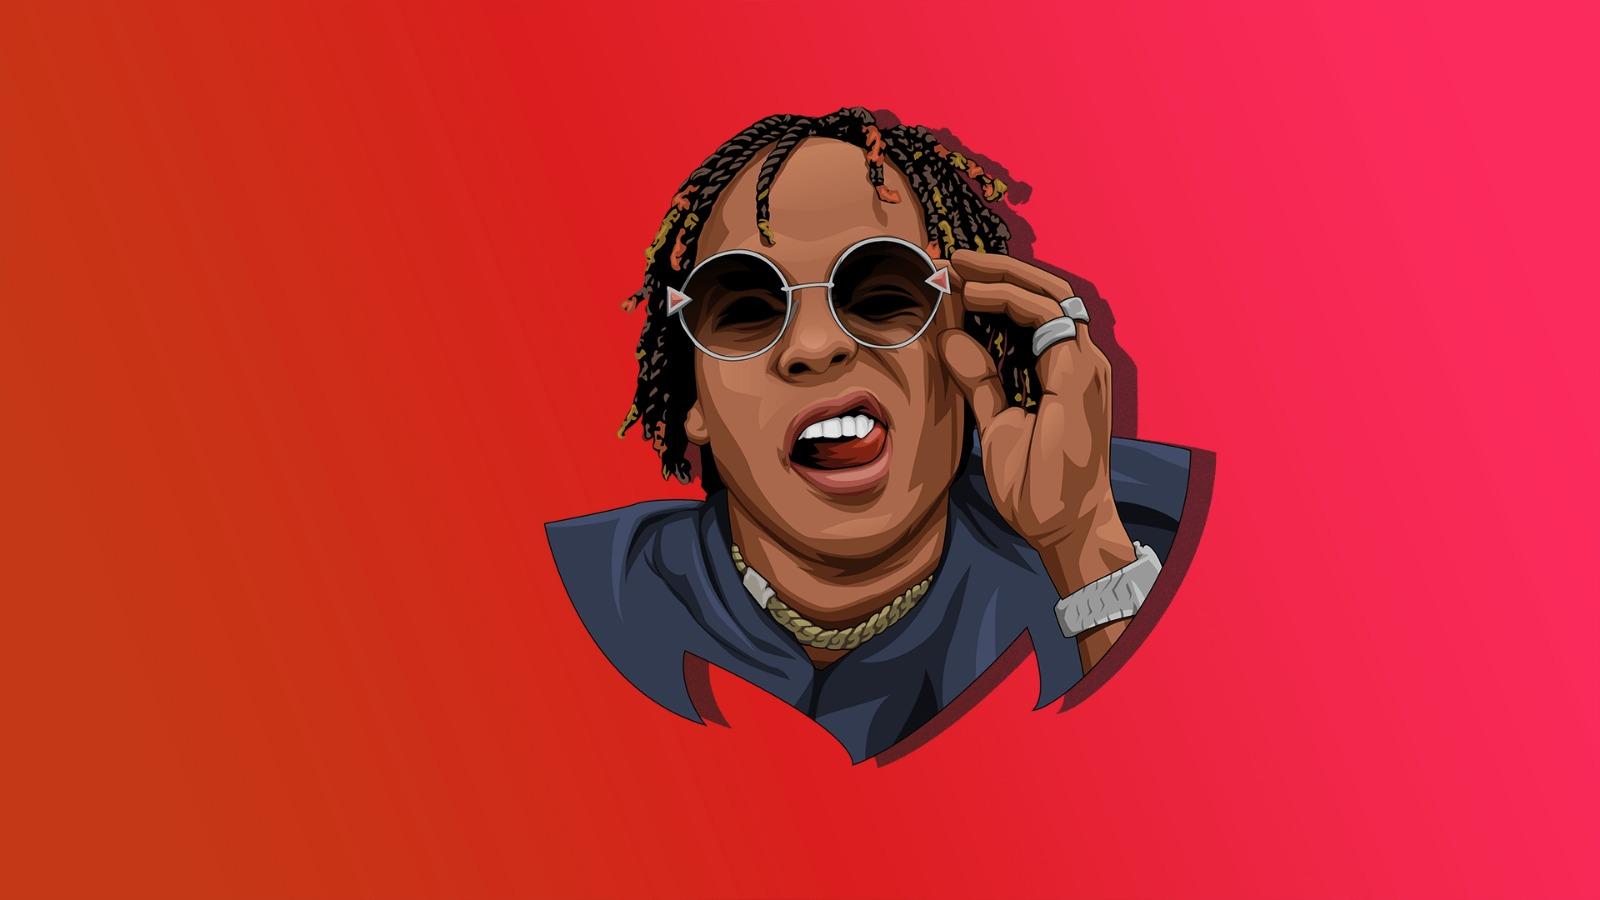 Plug Walk Type Beat by Rich The Kid from Skan Maker: Listen for free